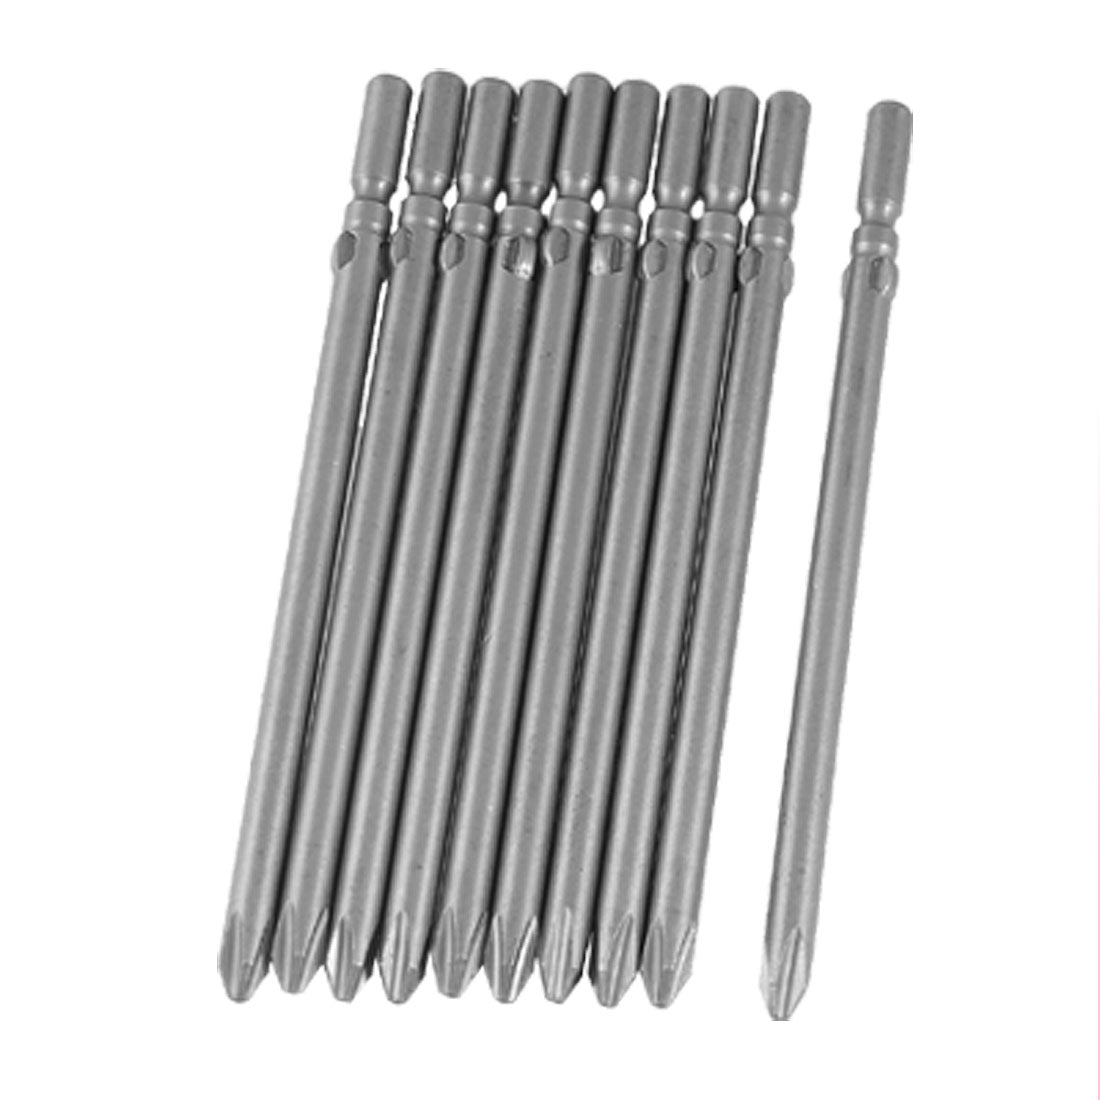 uxcell Uxcell 5mm Diameter 100mm Long Phillips PH2 Screwdriver Bits Replacement 10 Pcs